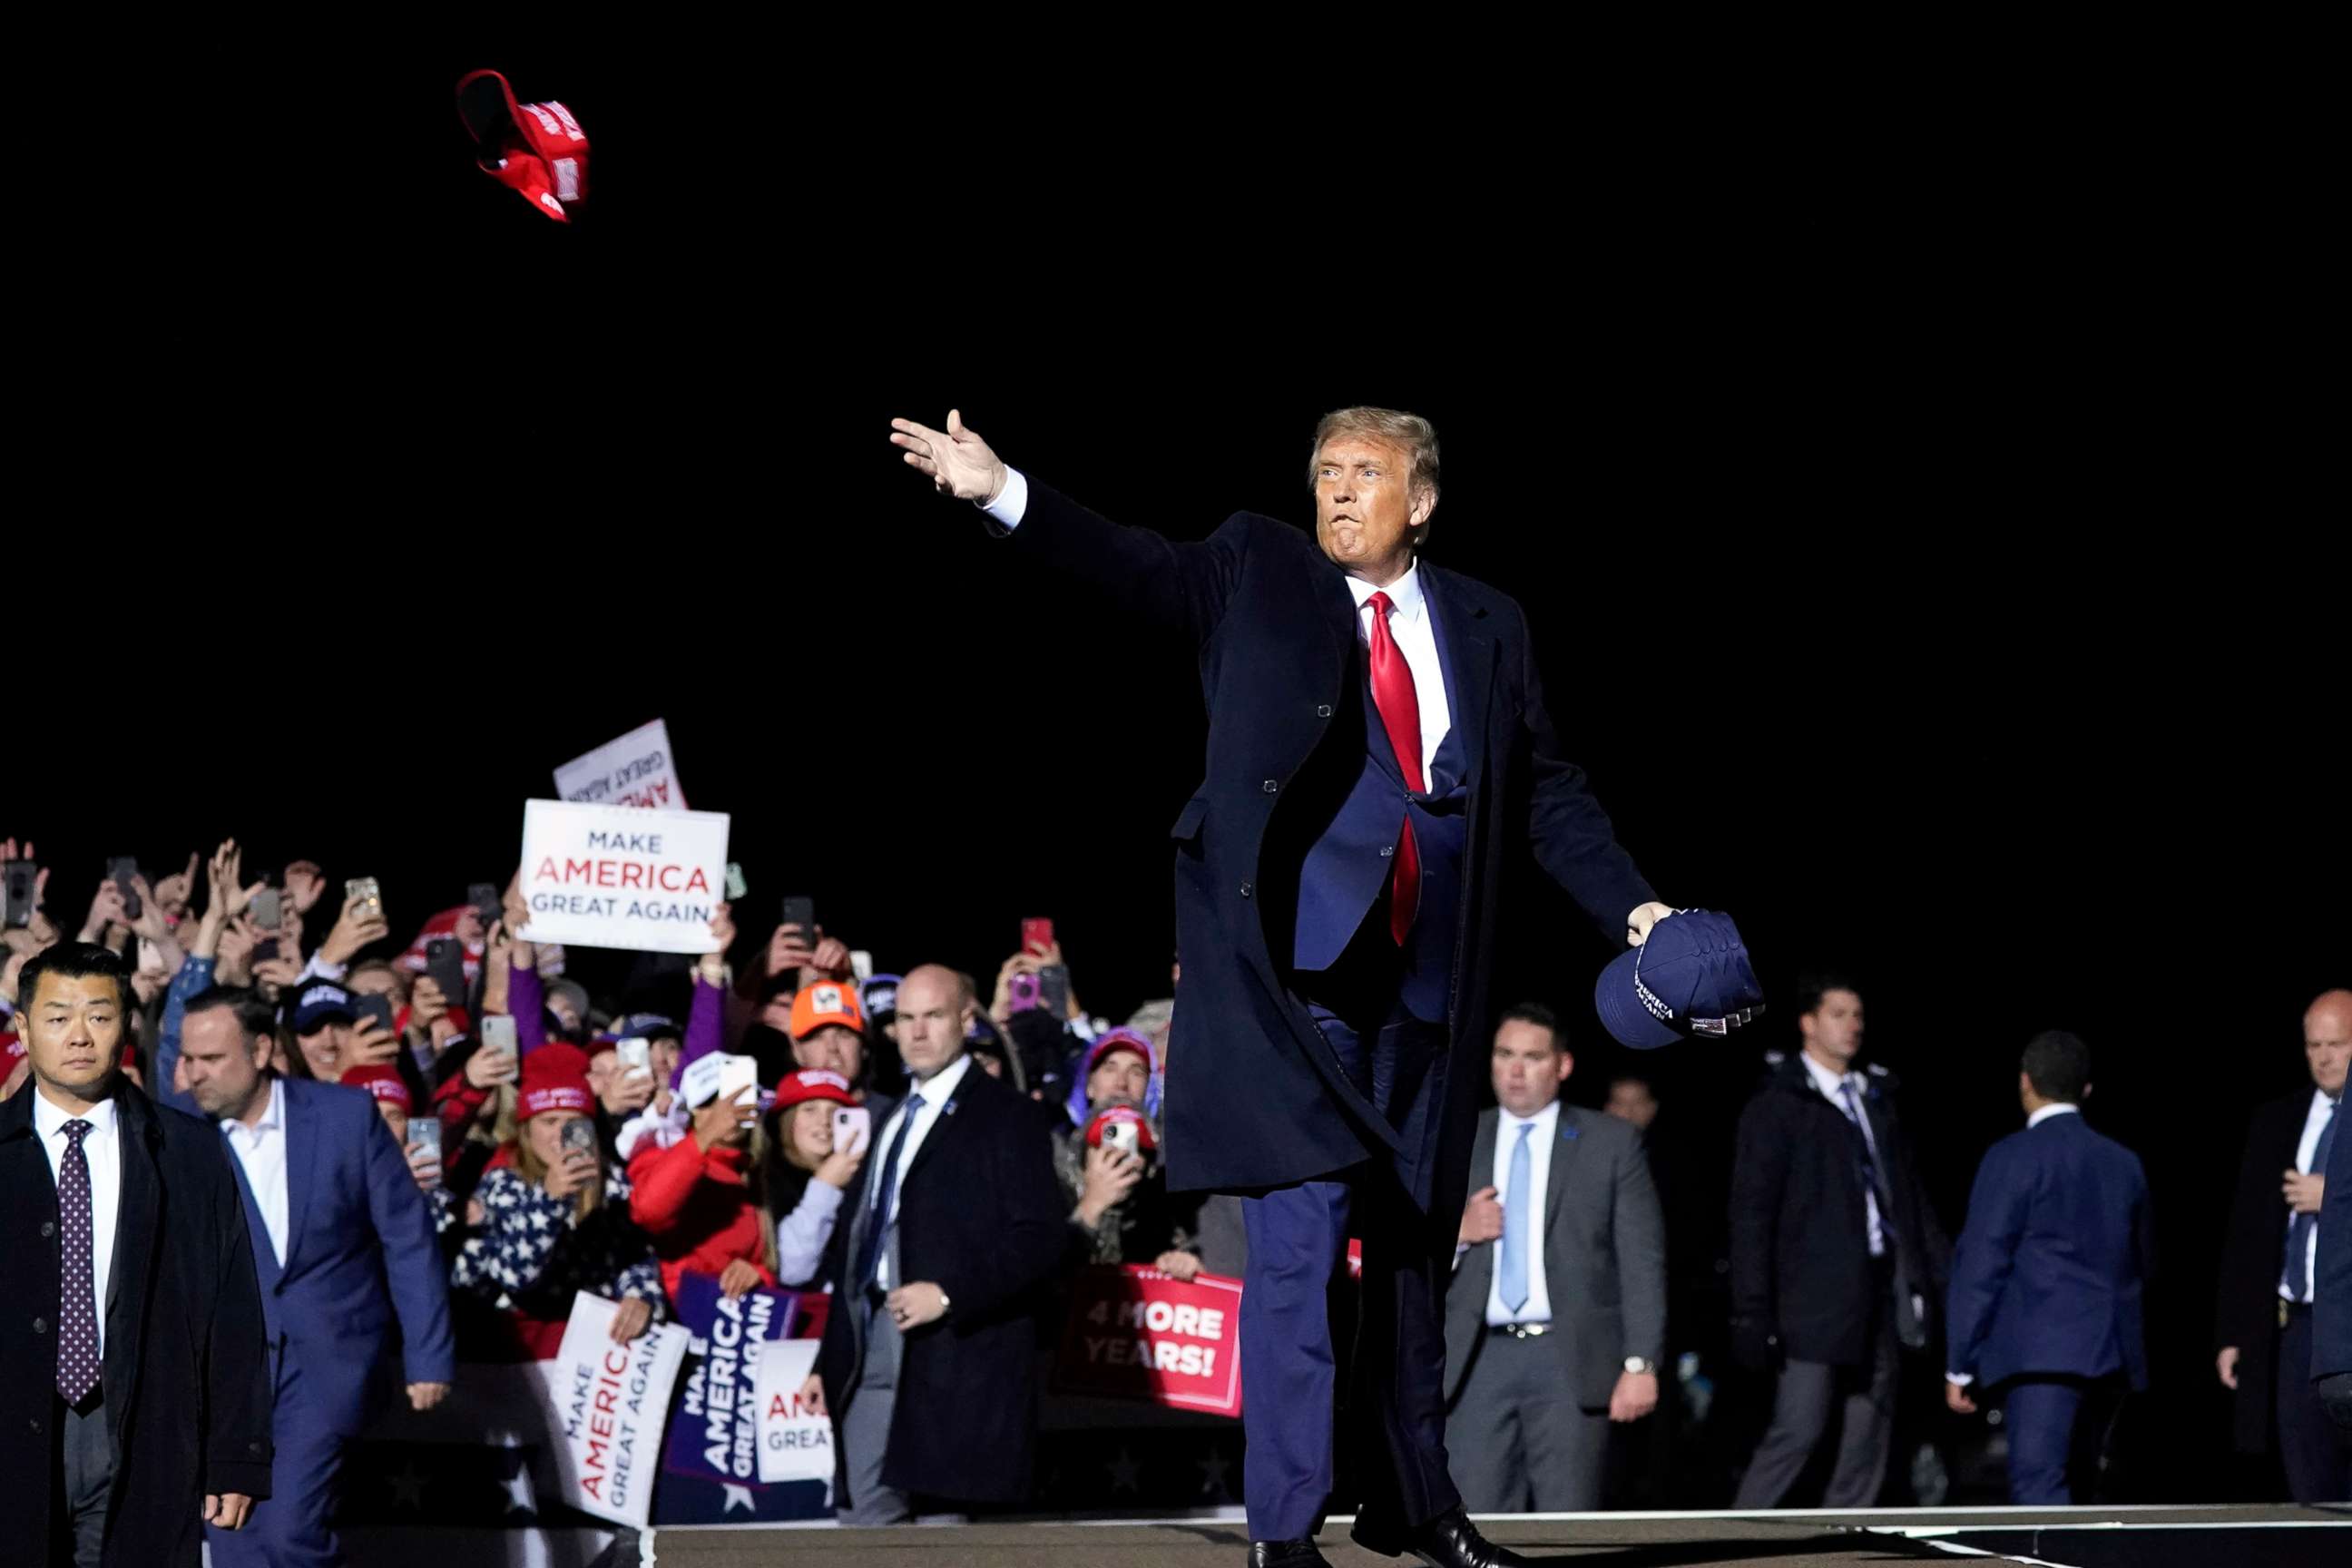 PHOTO: President Donald Trump throws hats to supporters after speaking at a campaign rally at Duluth International Airport in Duluth, Minn, Sept. 30, 2020.